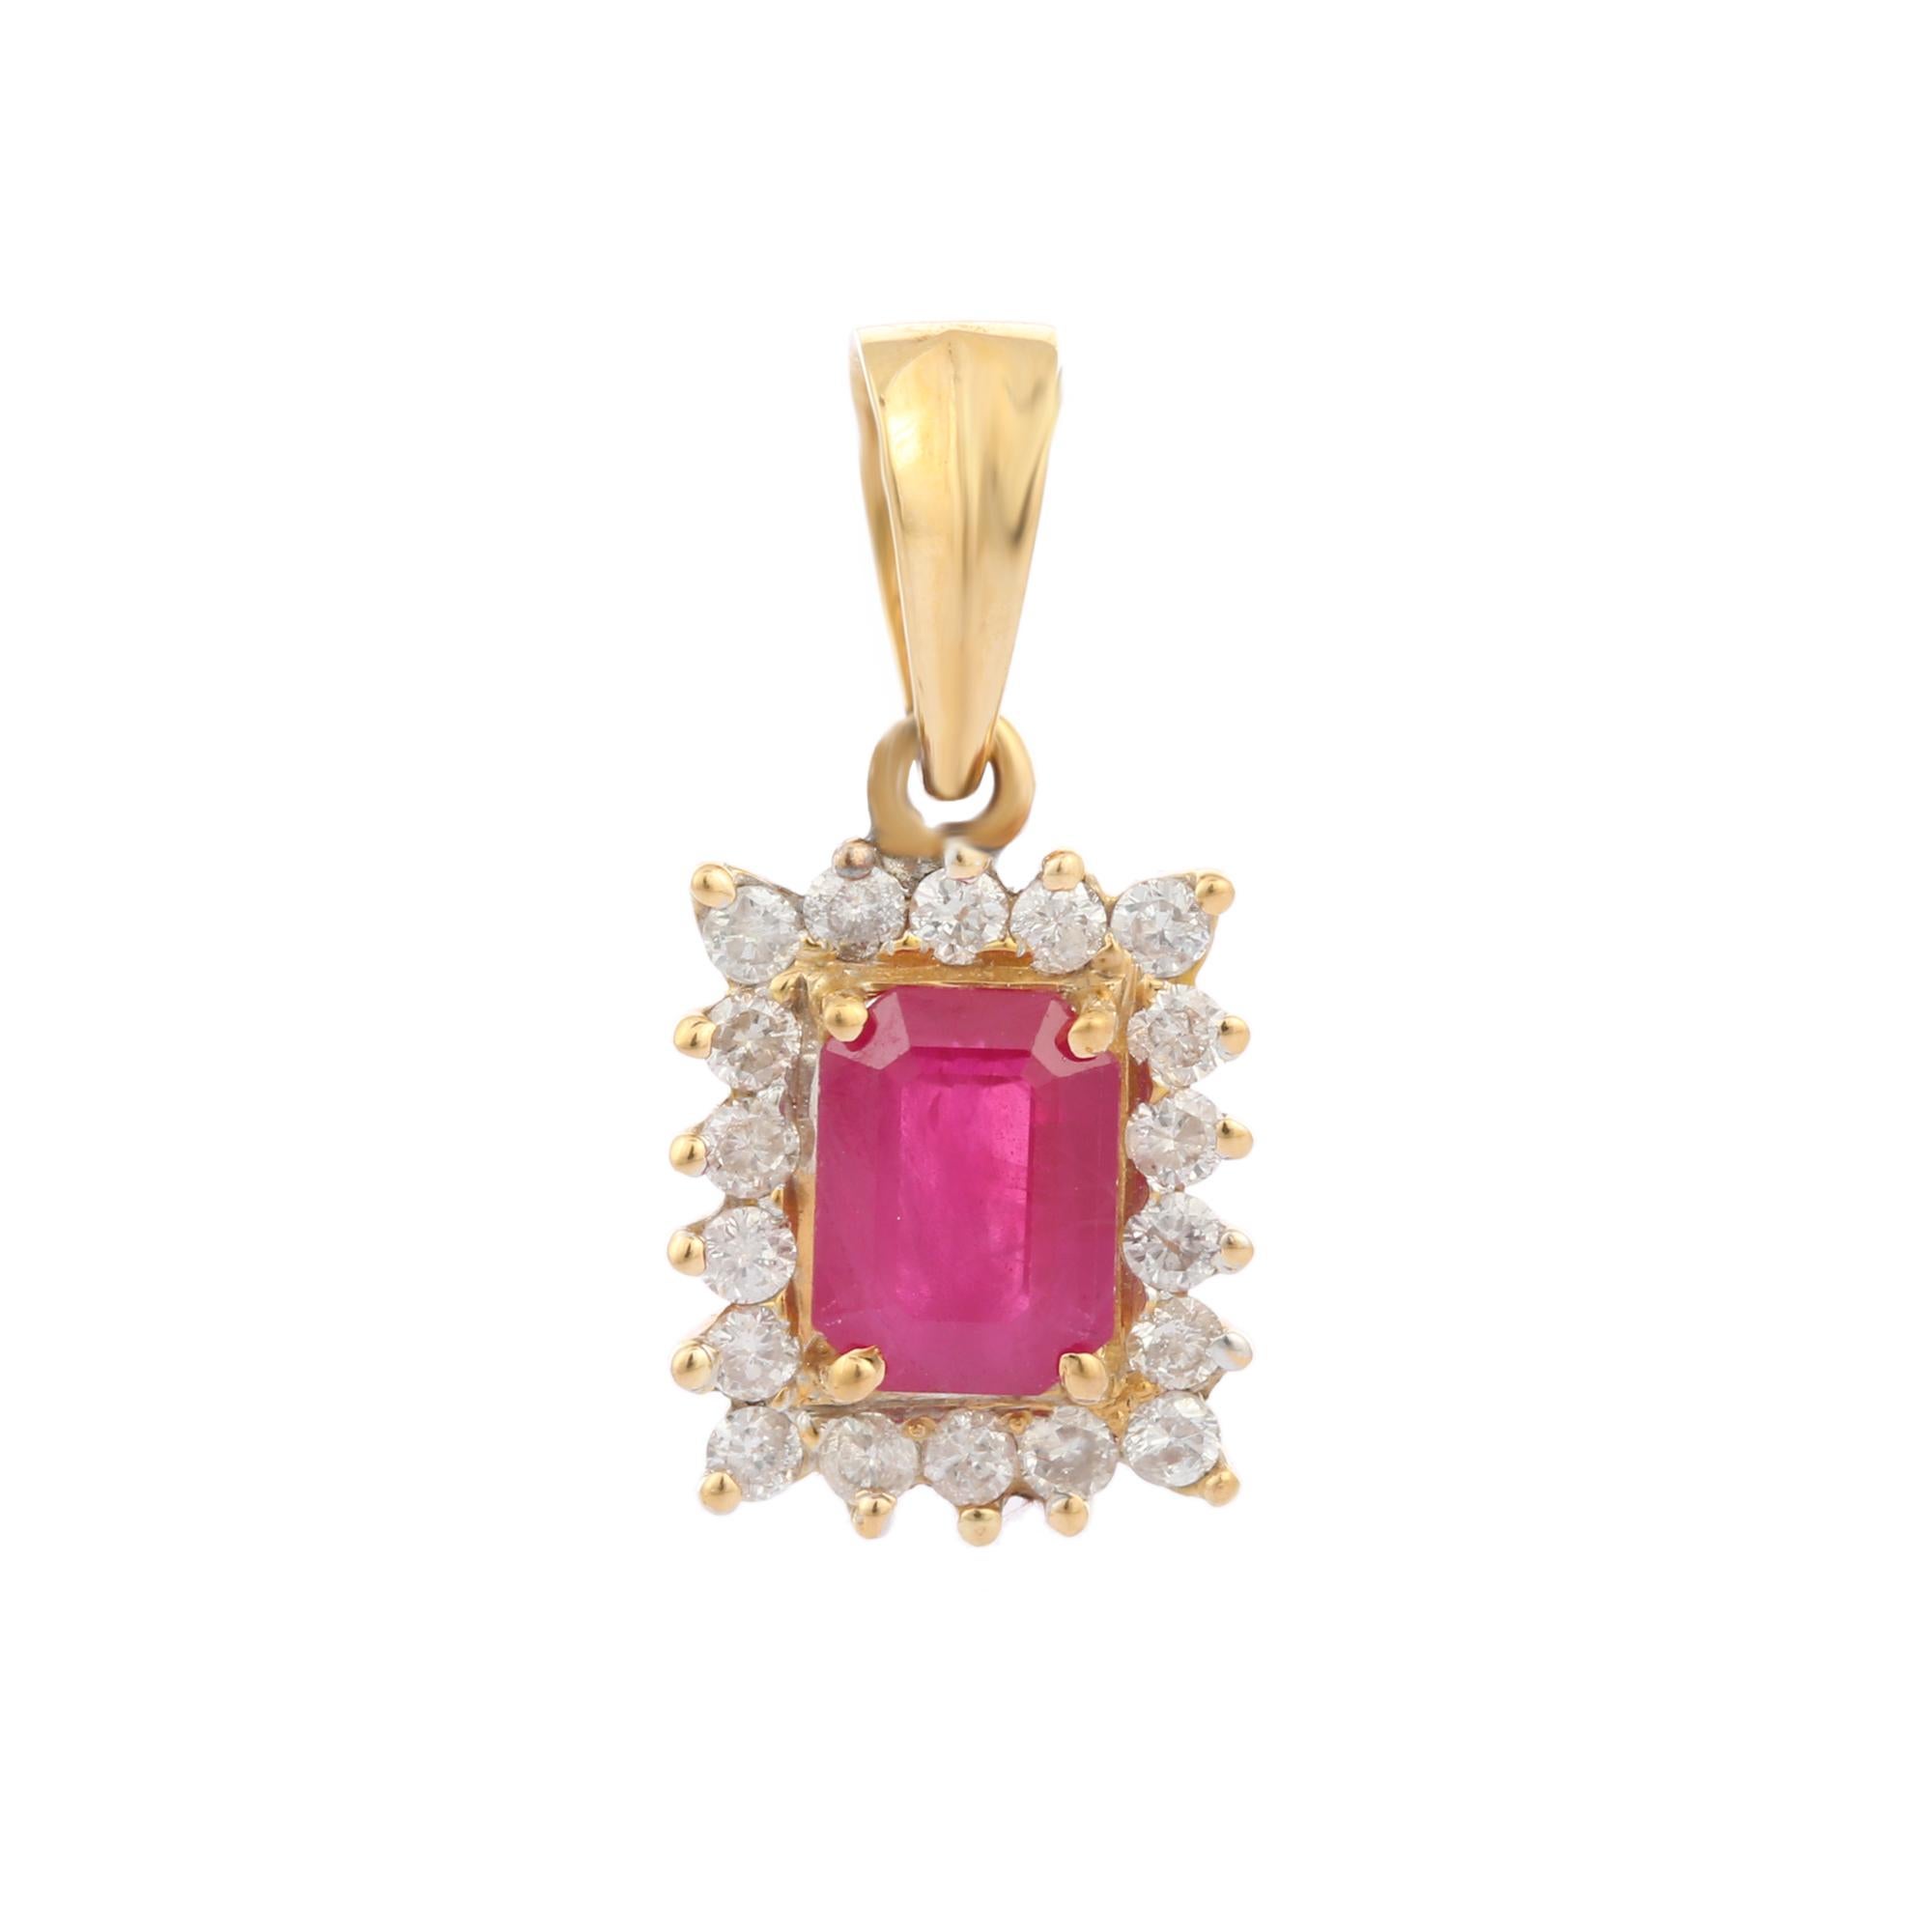 Octagon cut ruby diamond halo pendant in 18K Gold. It has a oval cut ruby with diamonds that completes your look with a decent touch. Pendants are used to wear or gifted to represent love and promises. It's an attractive jewelry piece that goes with